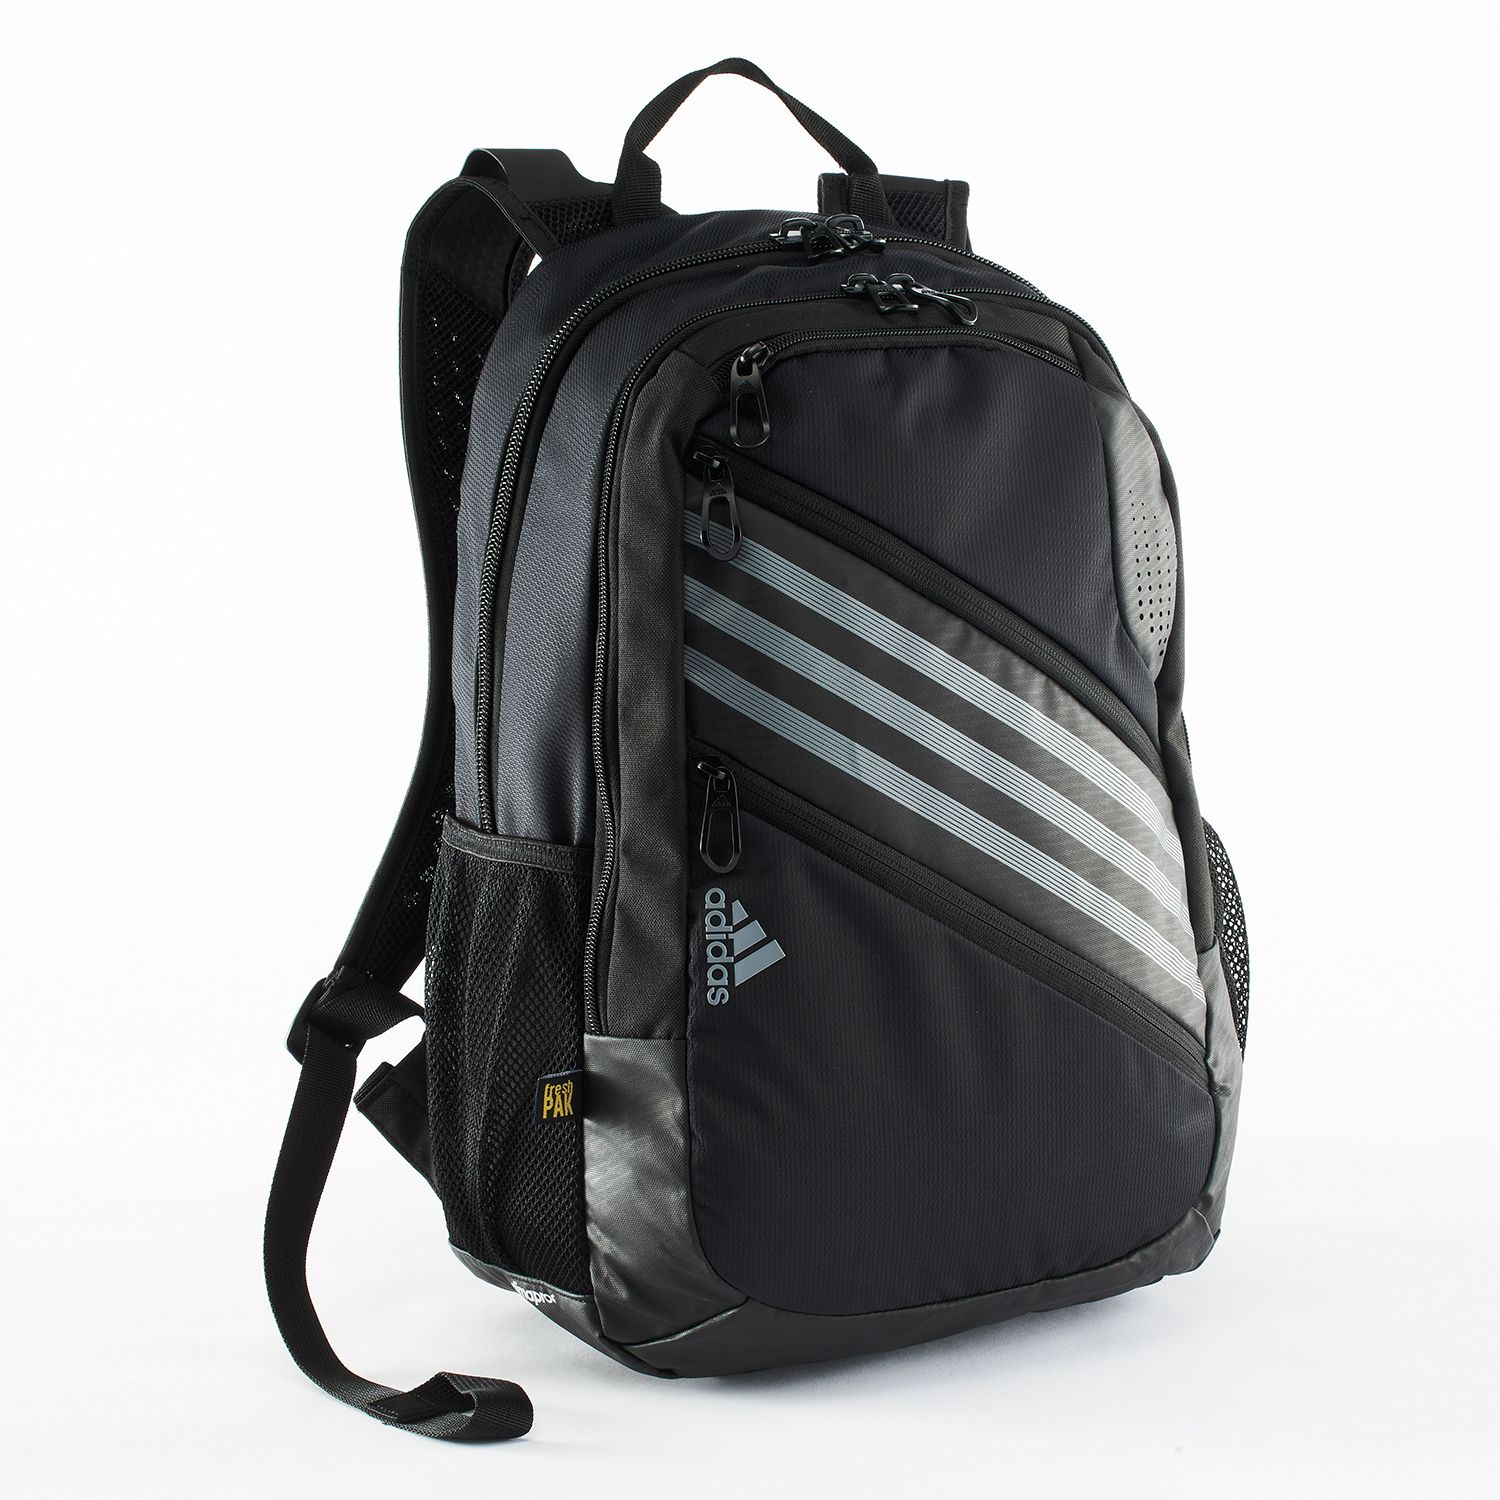 adidas climacool quick backpack